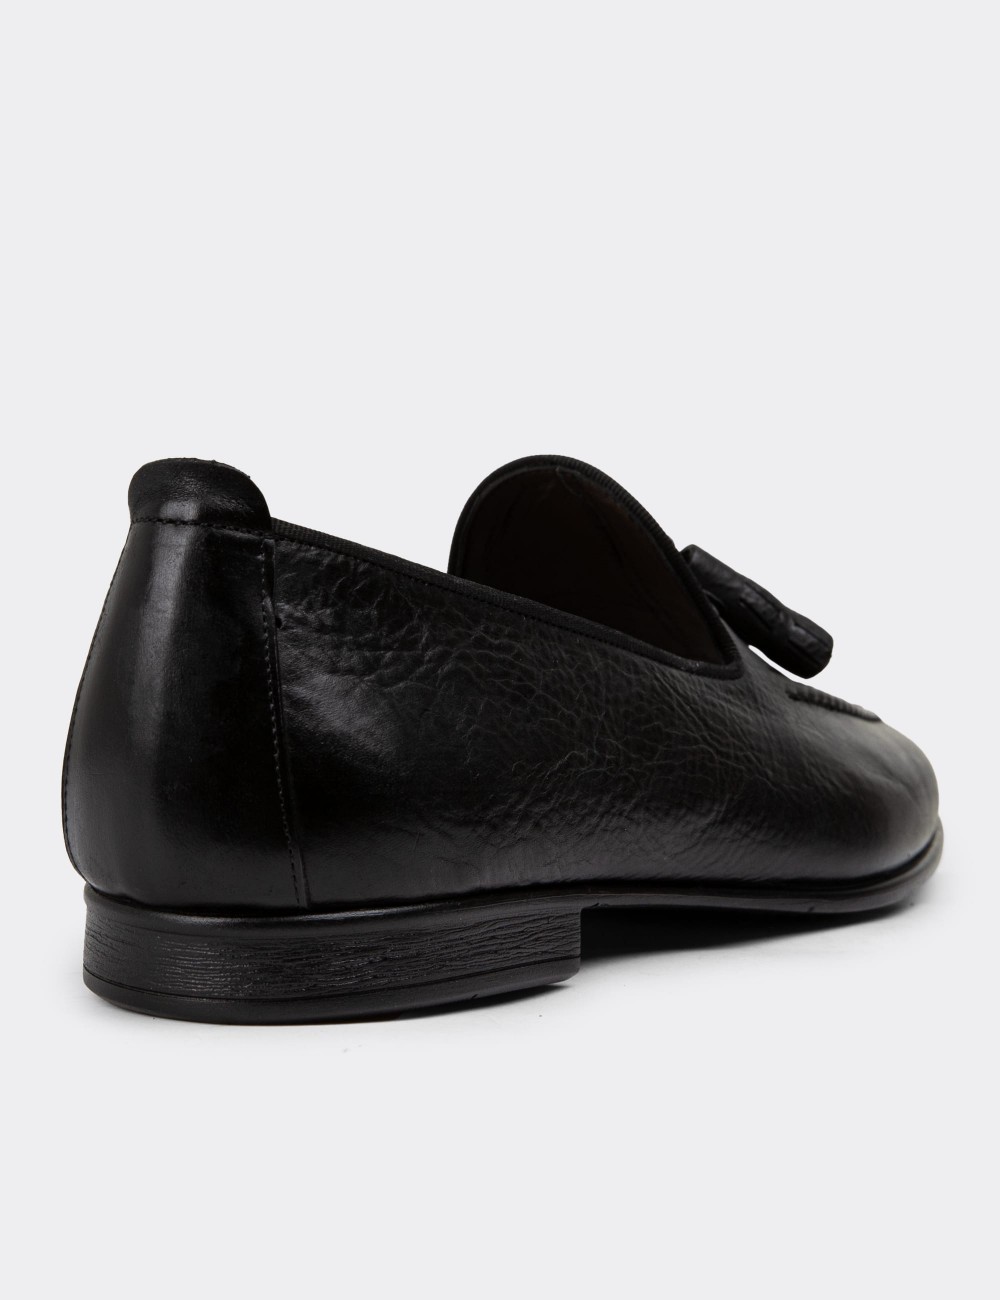 Black Leather Loafers - 01701MSYHC08